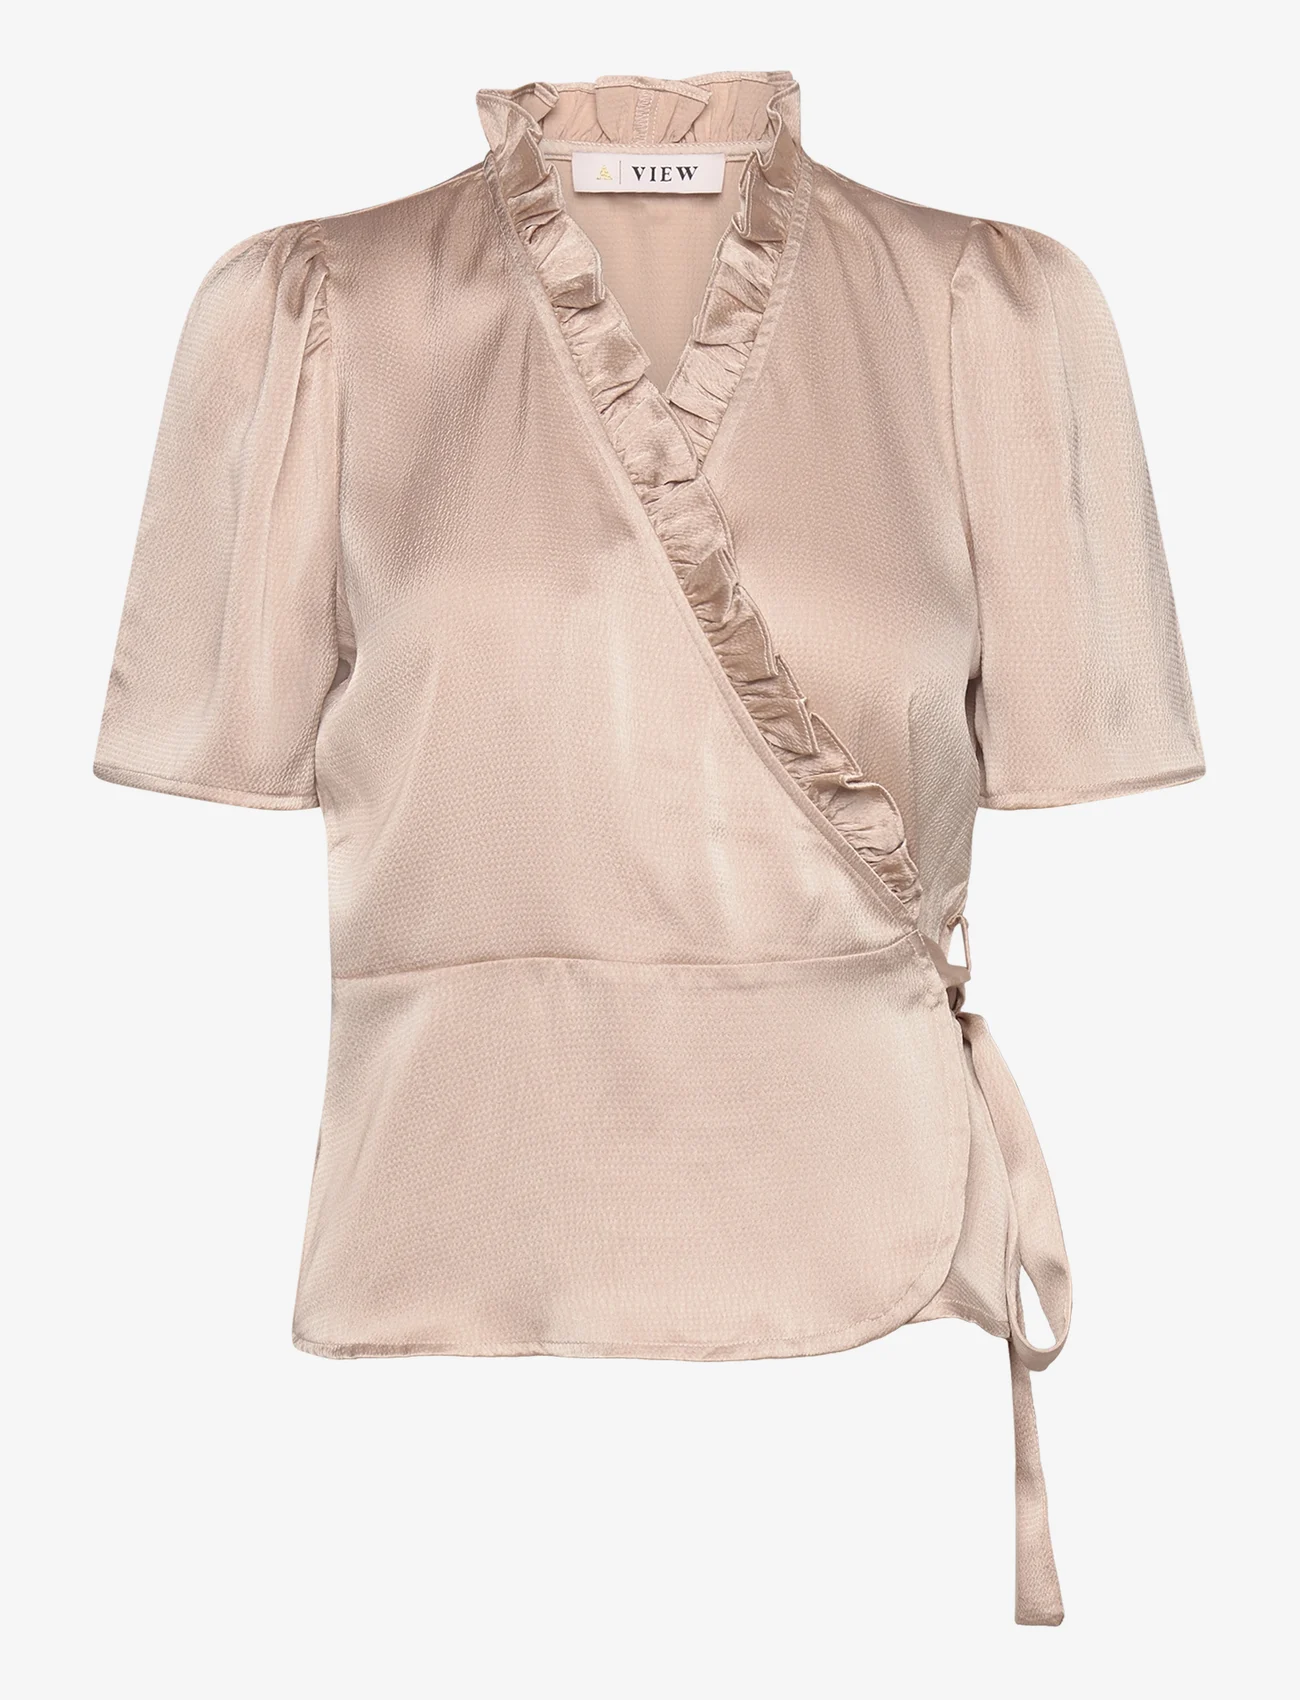 A-View - Peony blouse - short-sleeved blouses - light sand - 0